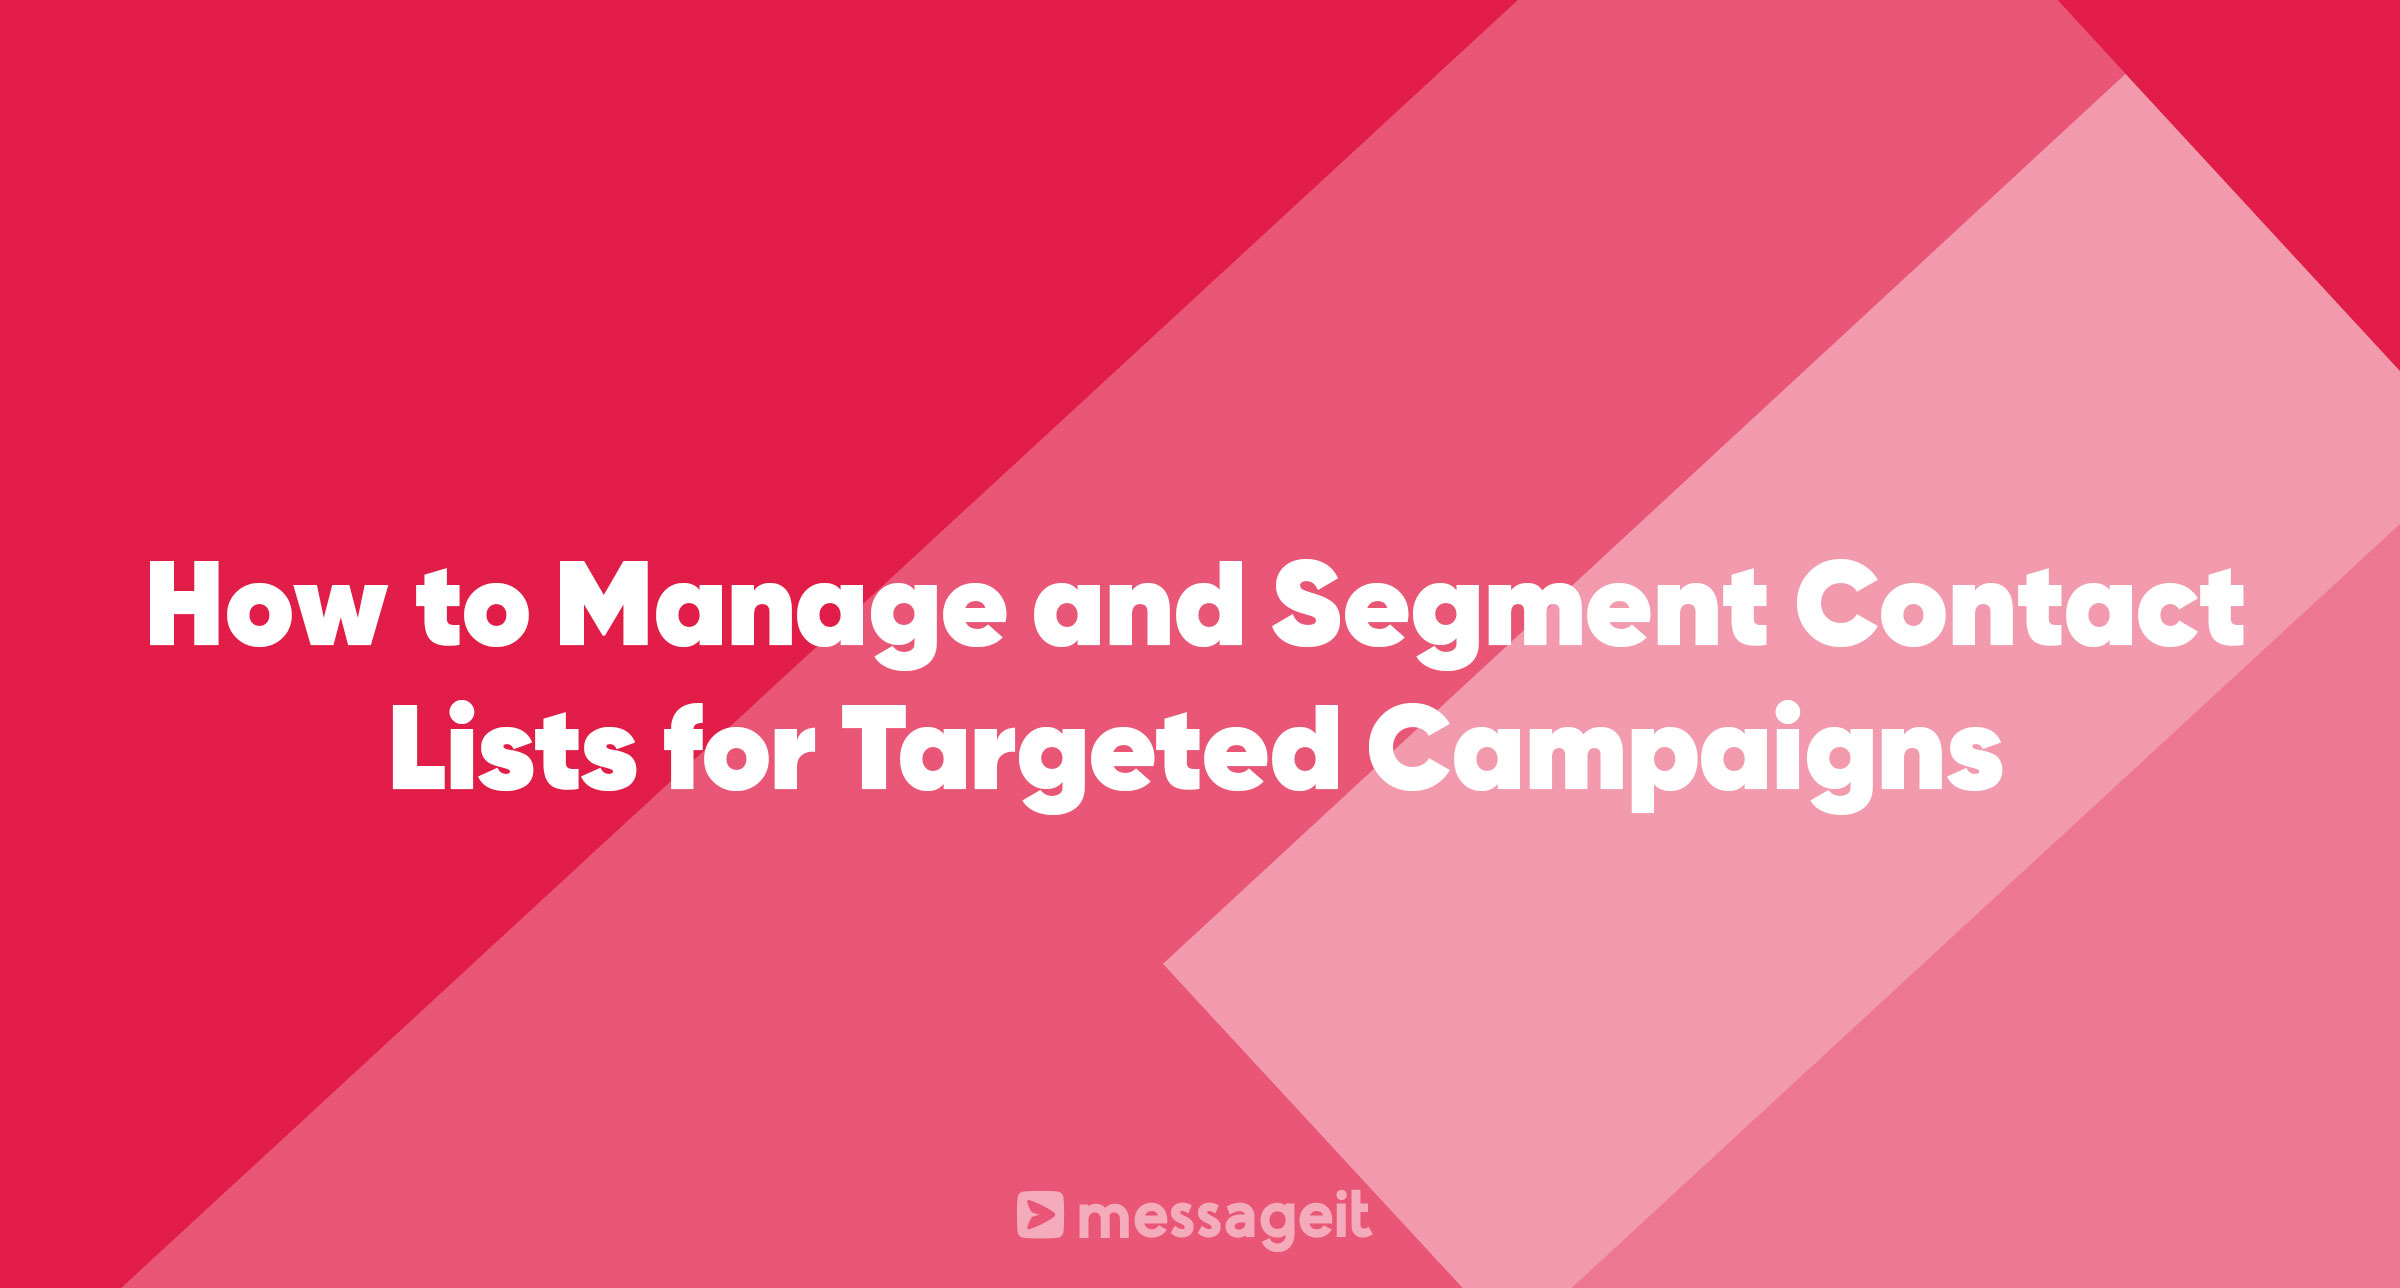 Article | How to Manage and Segment Contact Lists for Targeted Campaigns